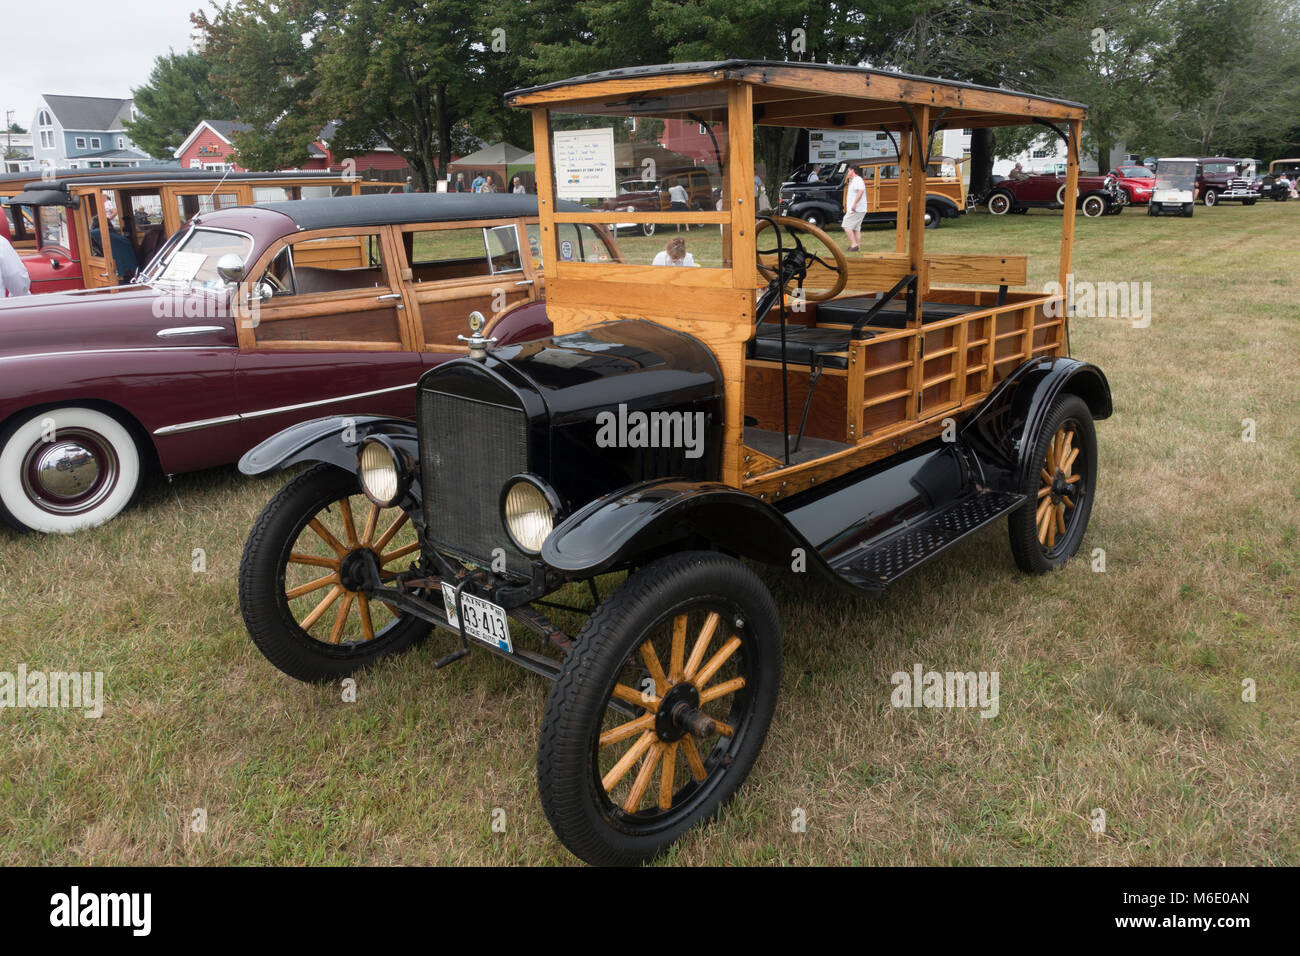 Antique Car Shows Near Me This Weekend / Sea Cruise Outdoor Museum Car